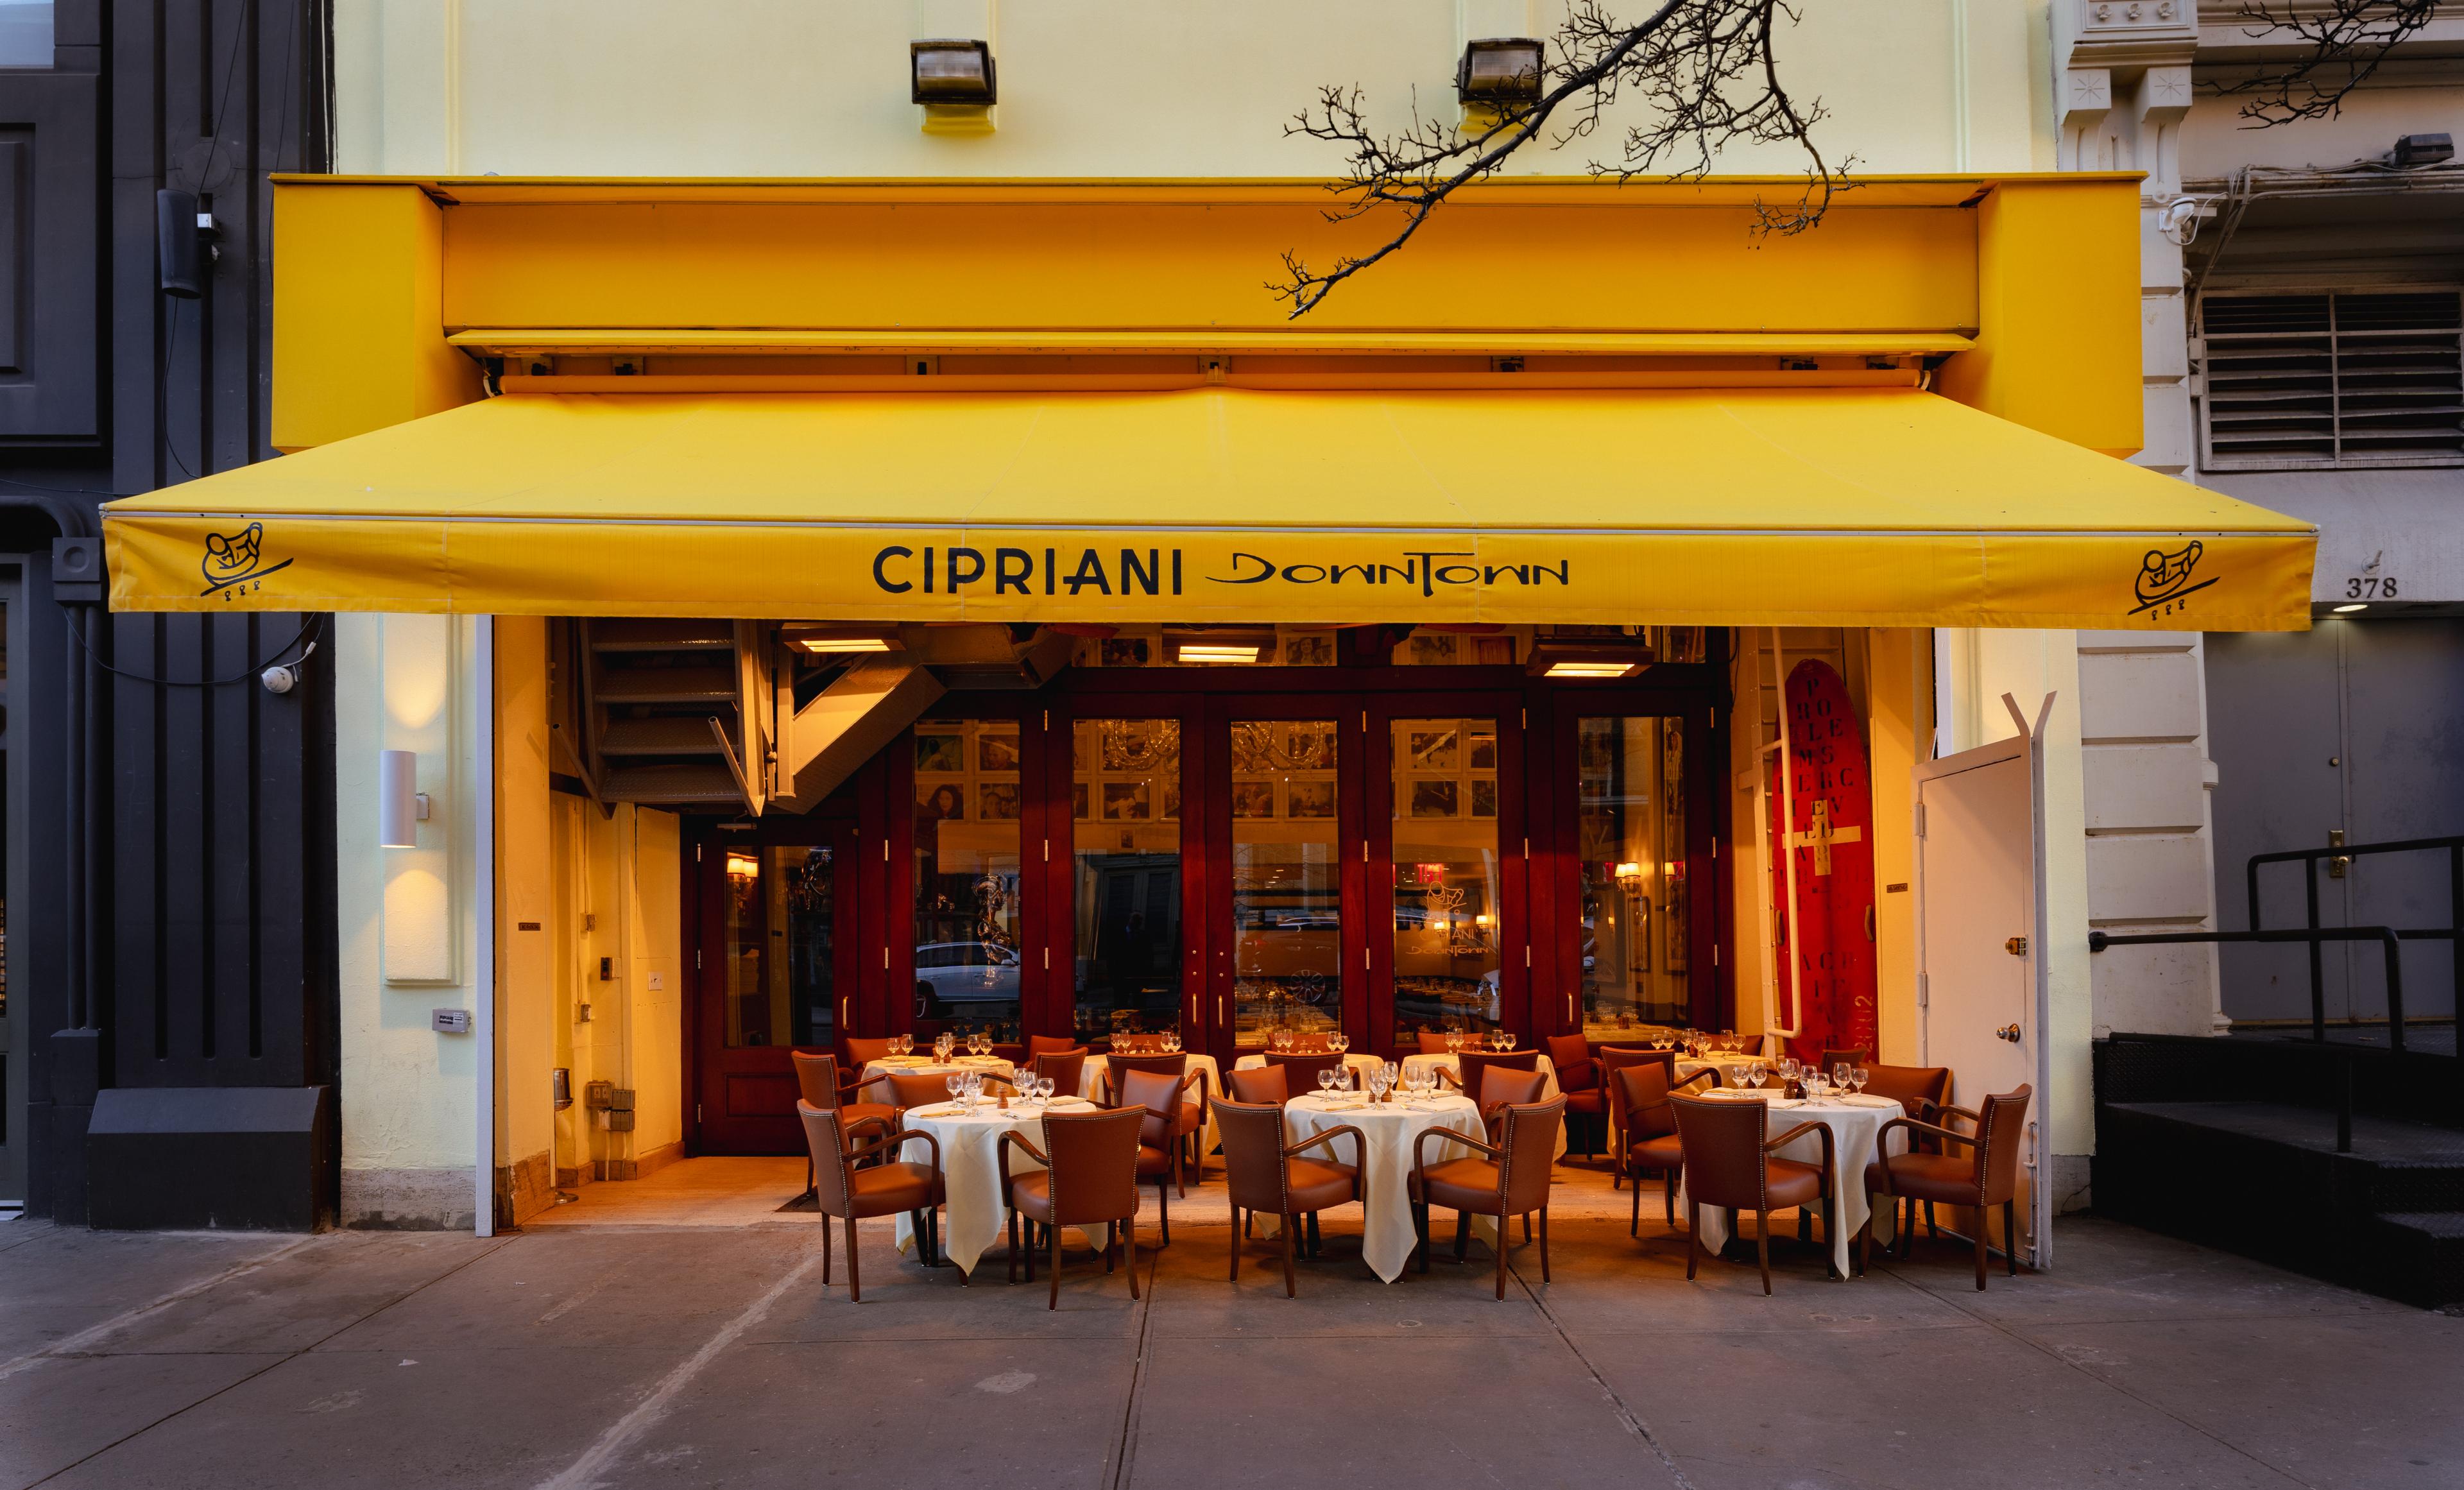 Cipriani Downtown restaurant, NYC